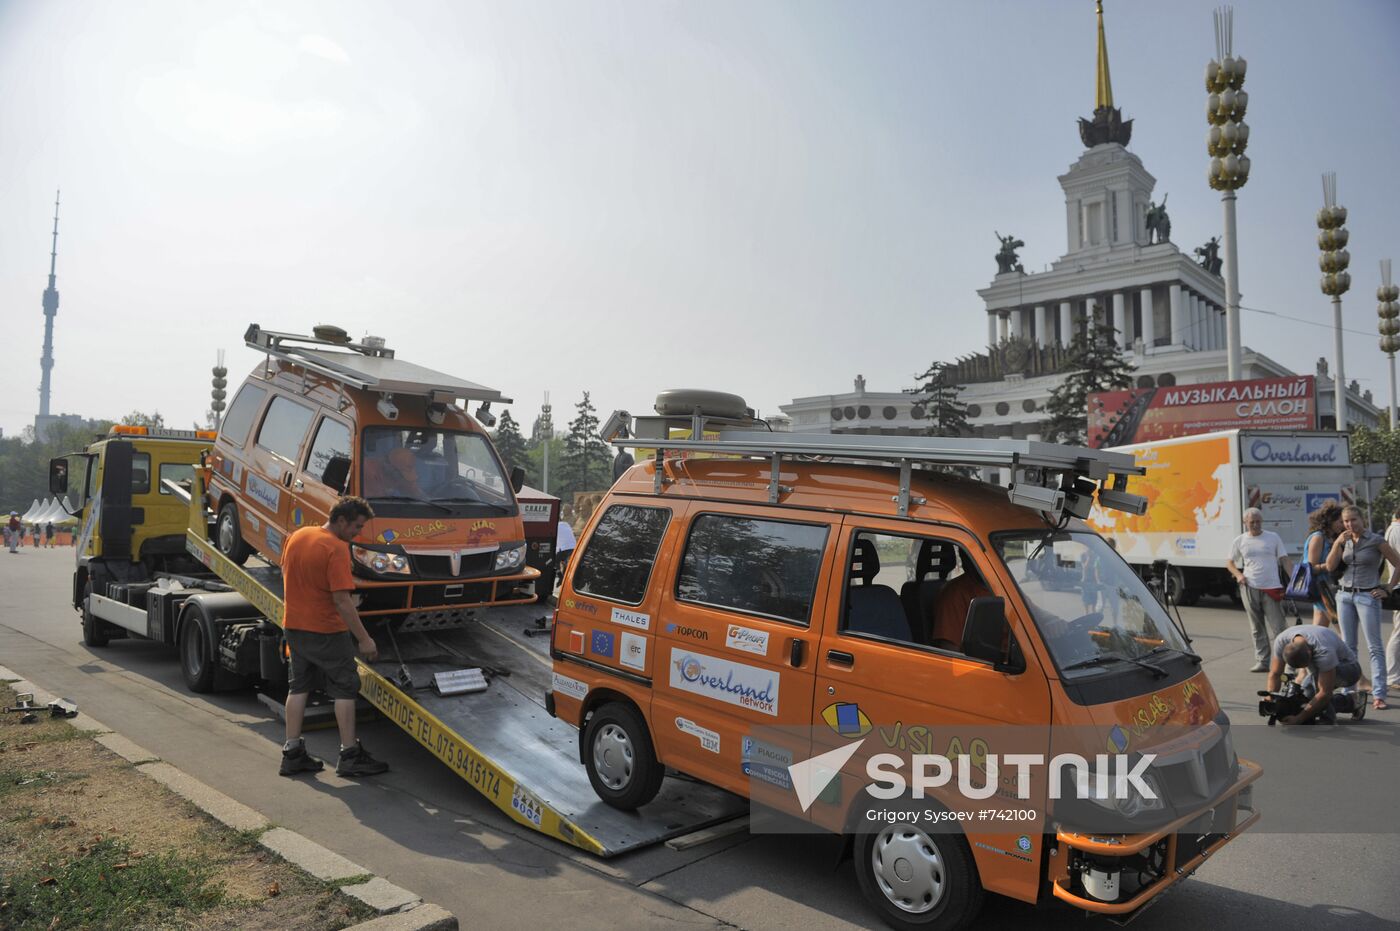 Overland World Truck Expedition electric minivans rally